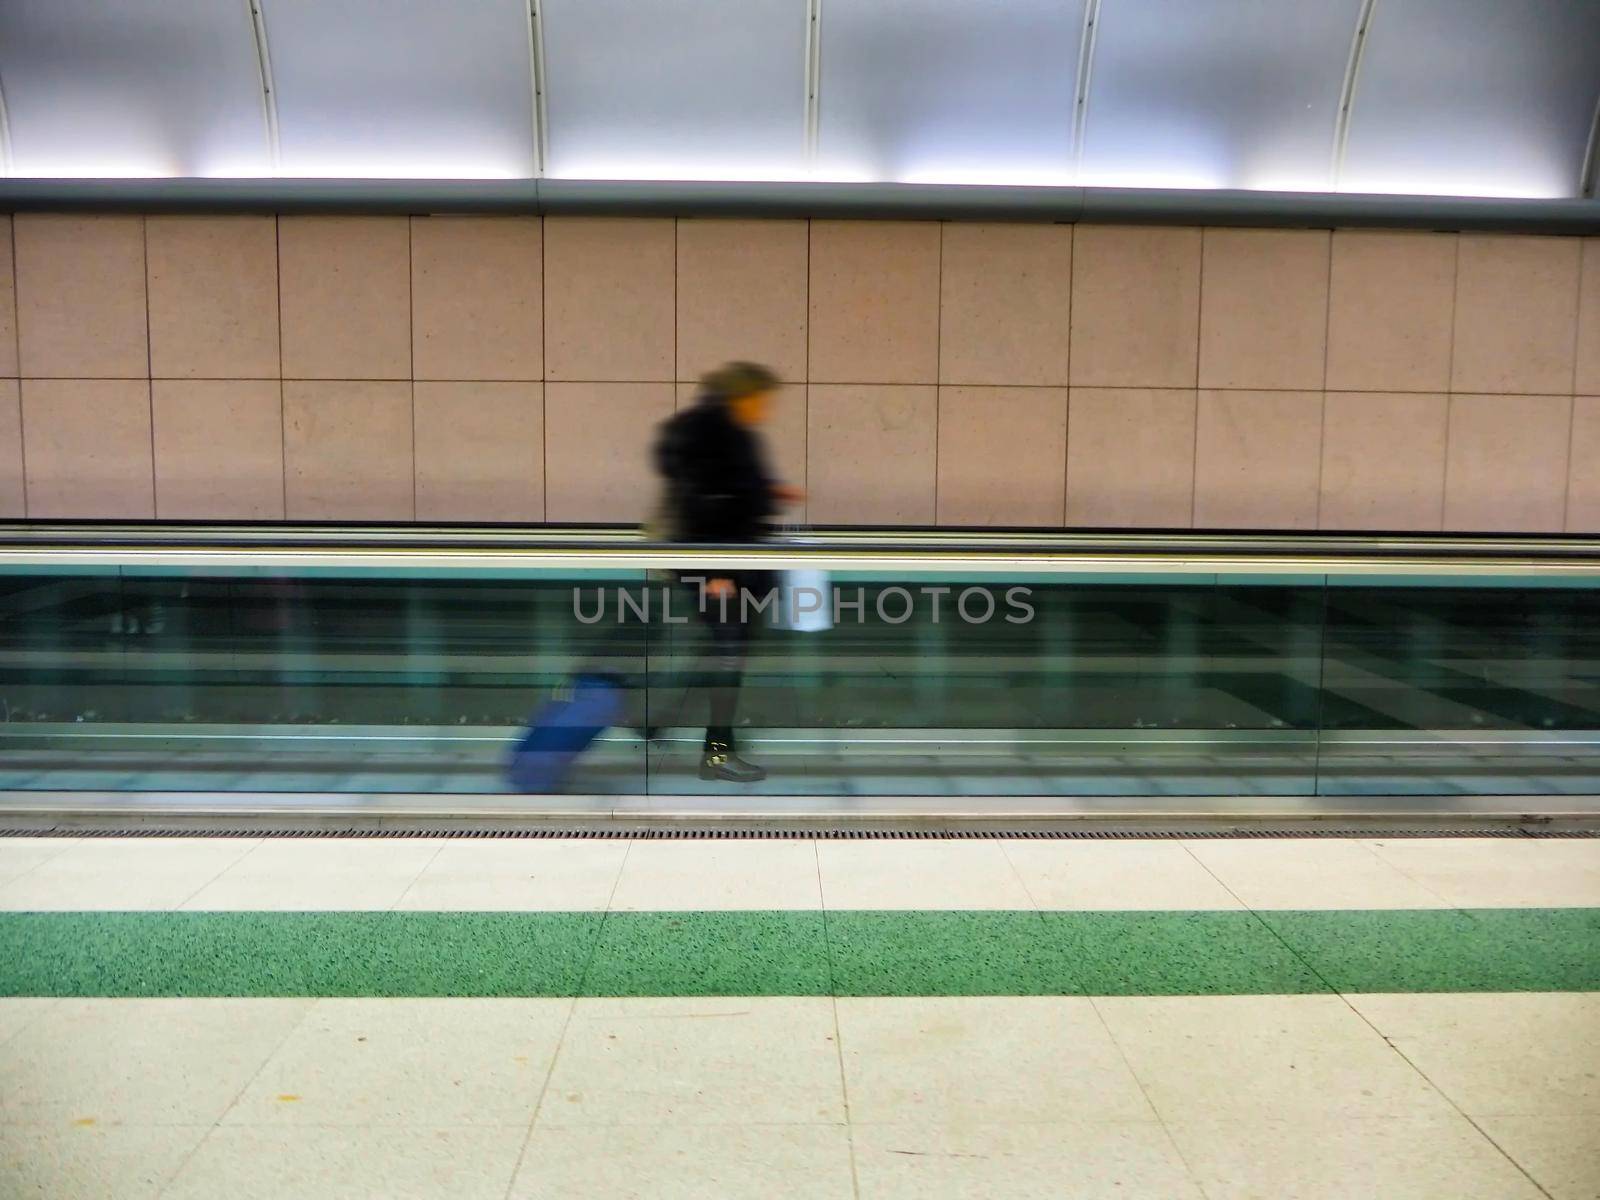 Unrecognizable traveler on hurry motion effect of blurred person alone
Milan Italy February 5 2020